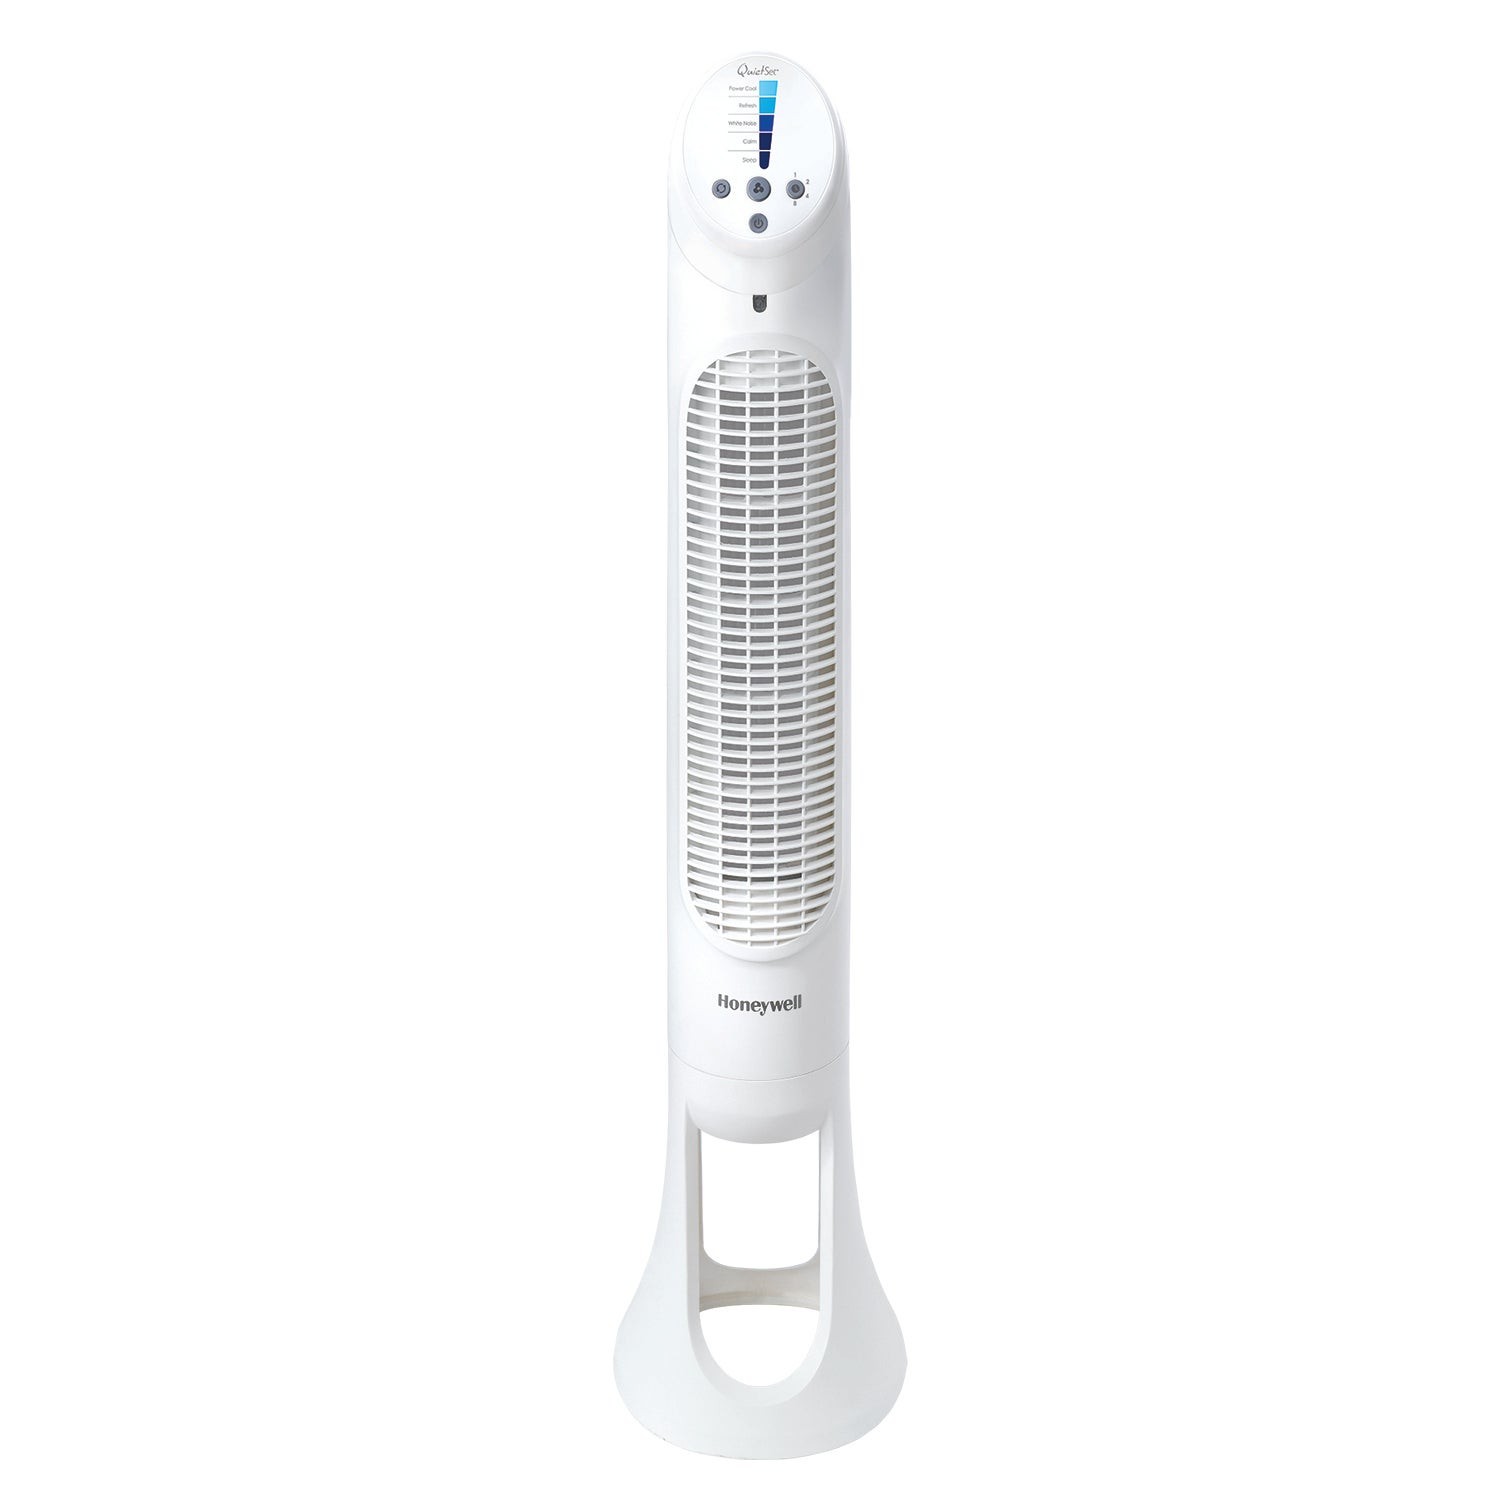 QuietSet Whole Room Tower Fan White